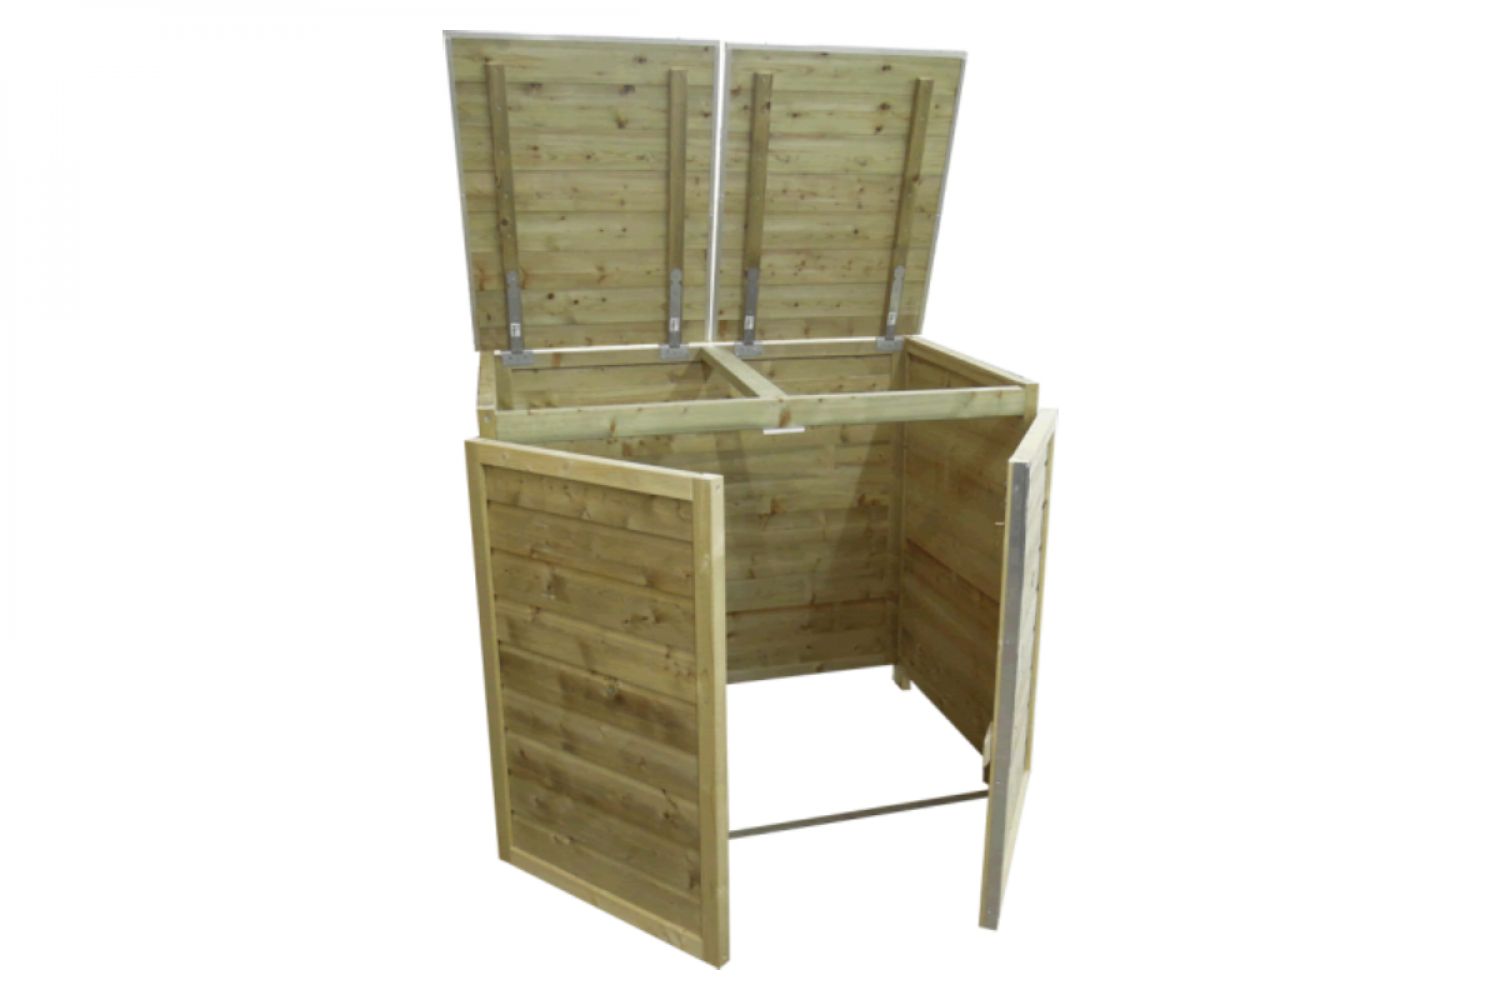 Containerberging dubbel 150x90x122 cm